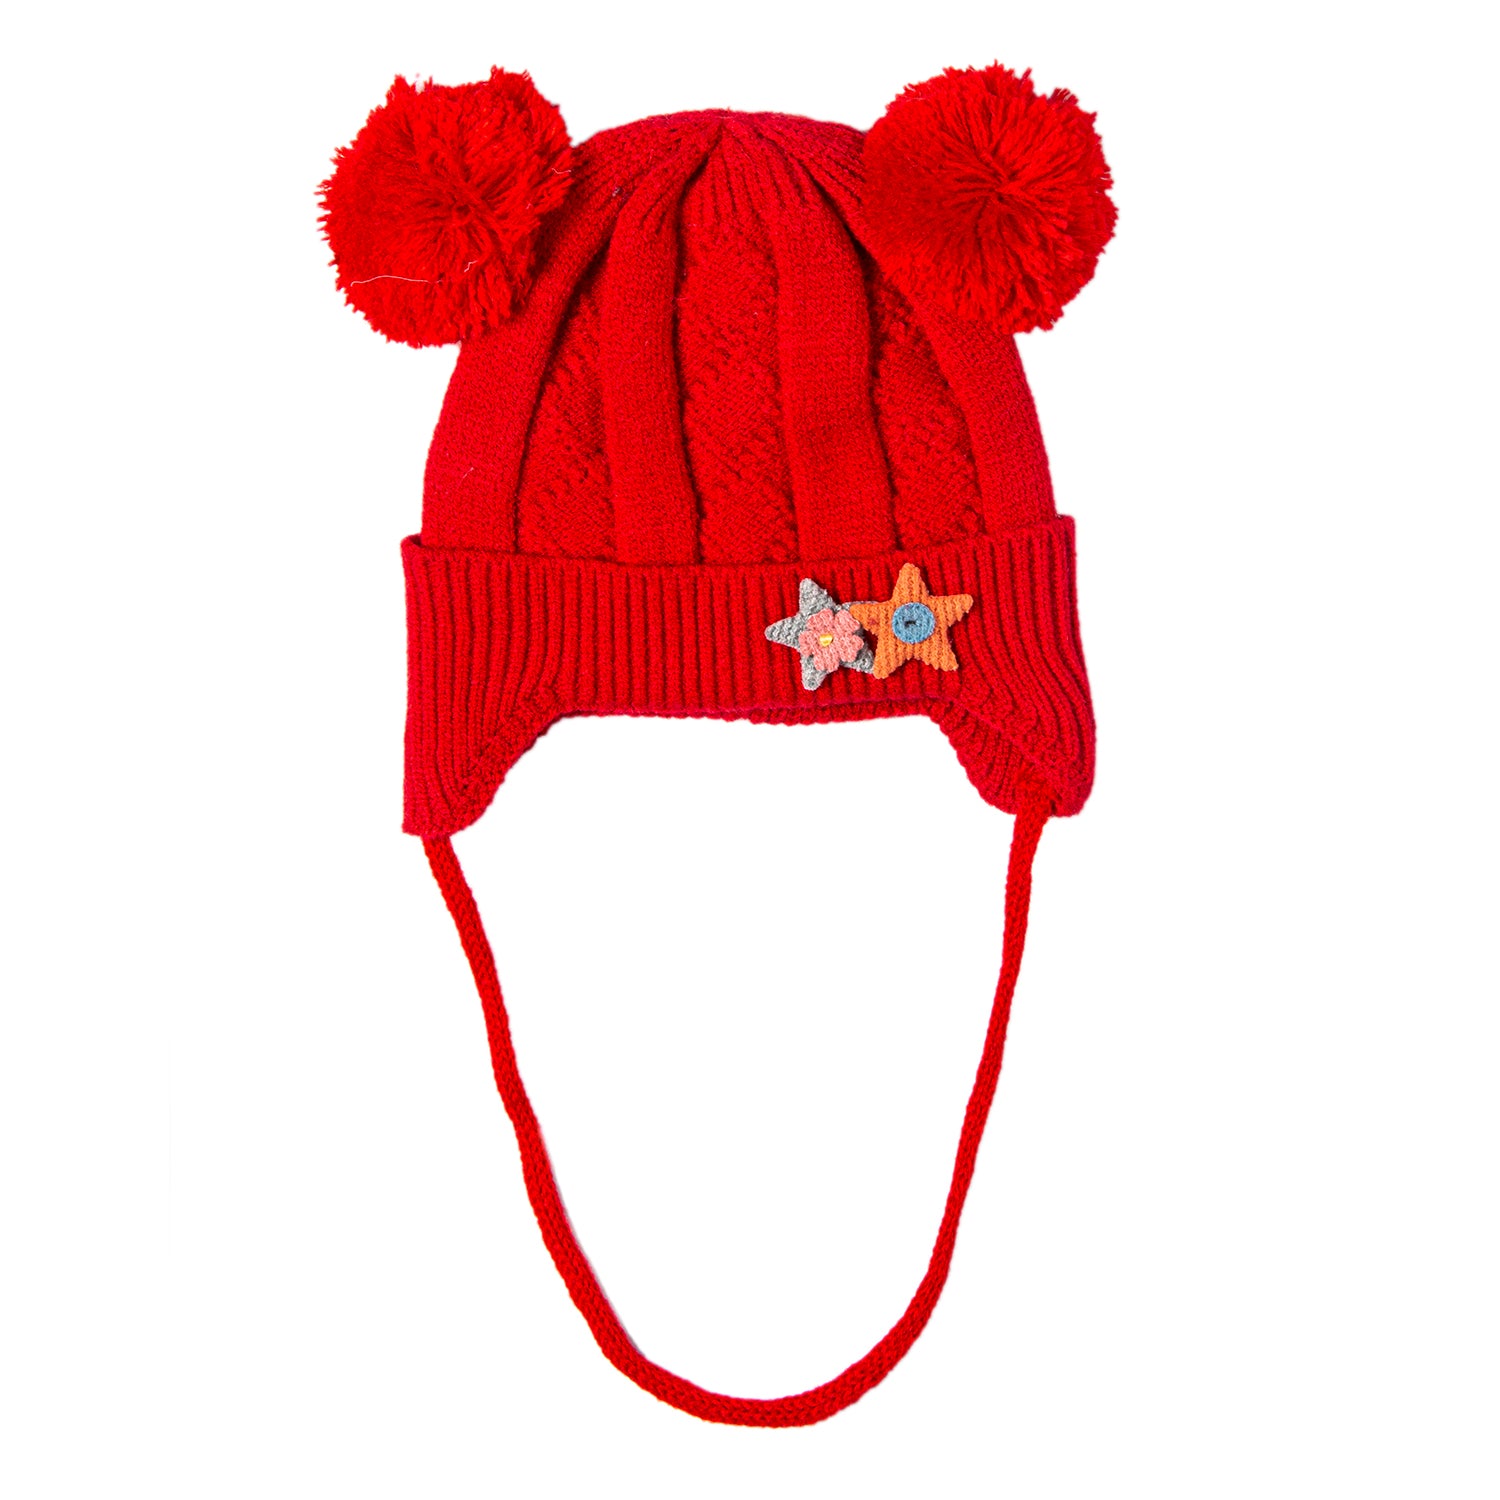 Baby Moo Knit Woollen Cap With Tie For Ear Cover Starry Pom Pom Red